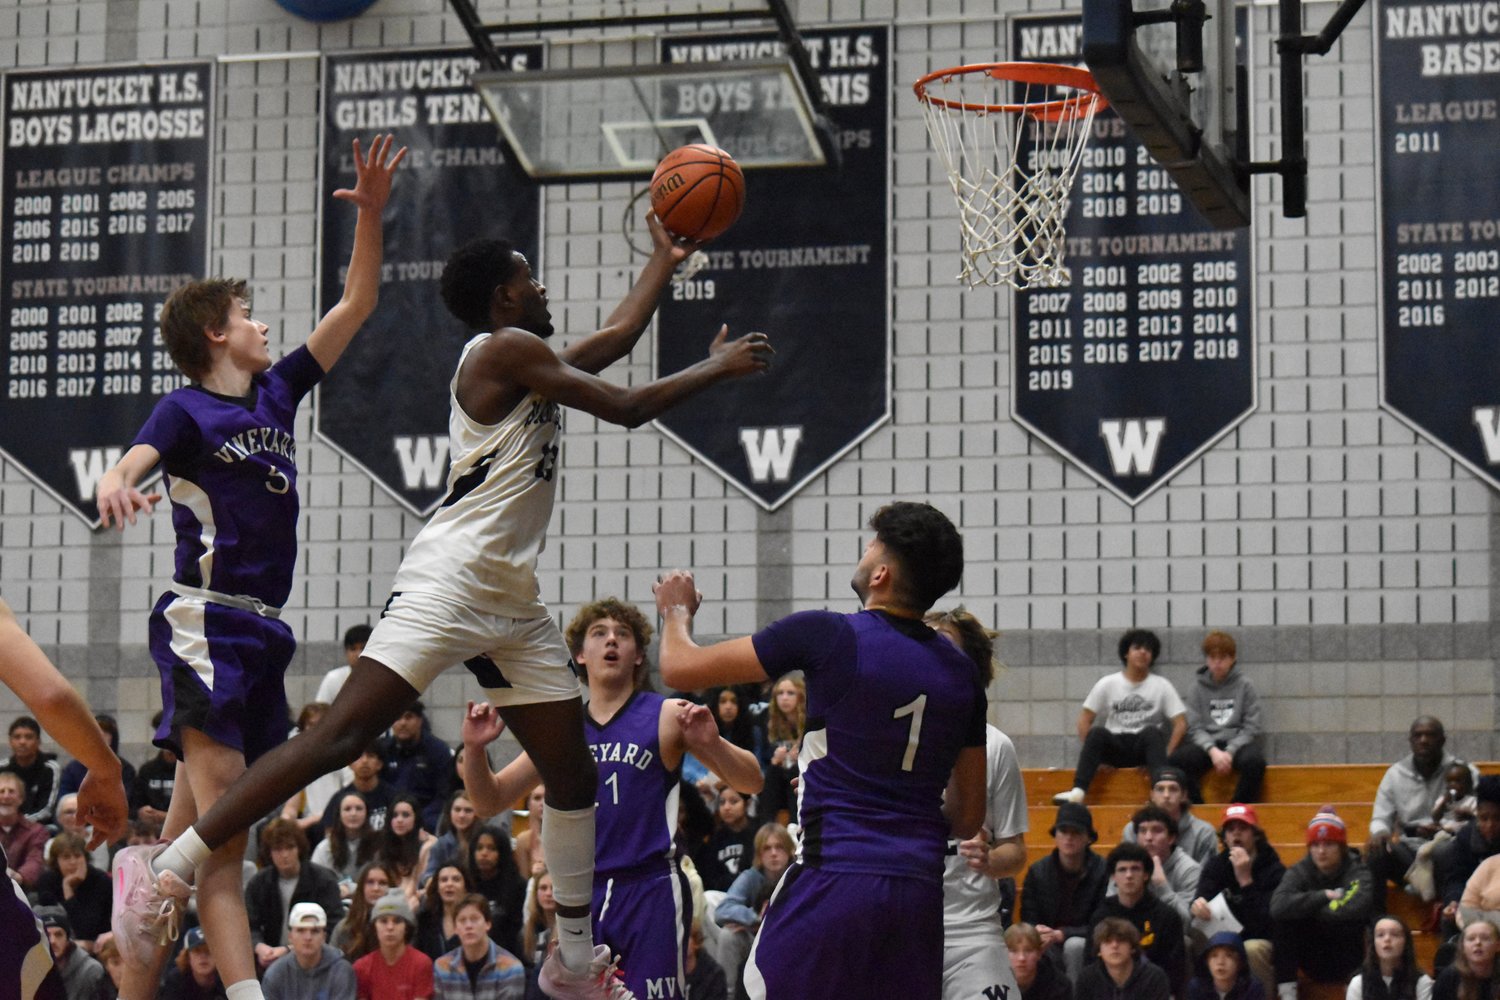 Jayquan Francis rises up for a layup during Saturday's game against Martha's Vineyard.